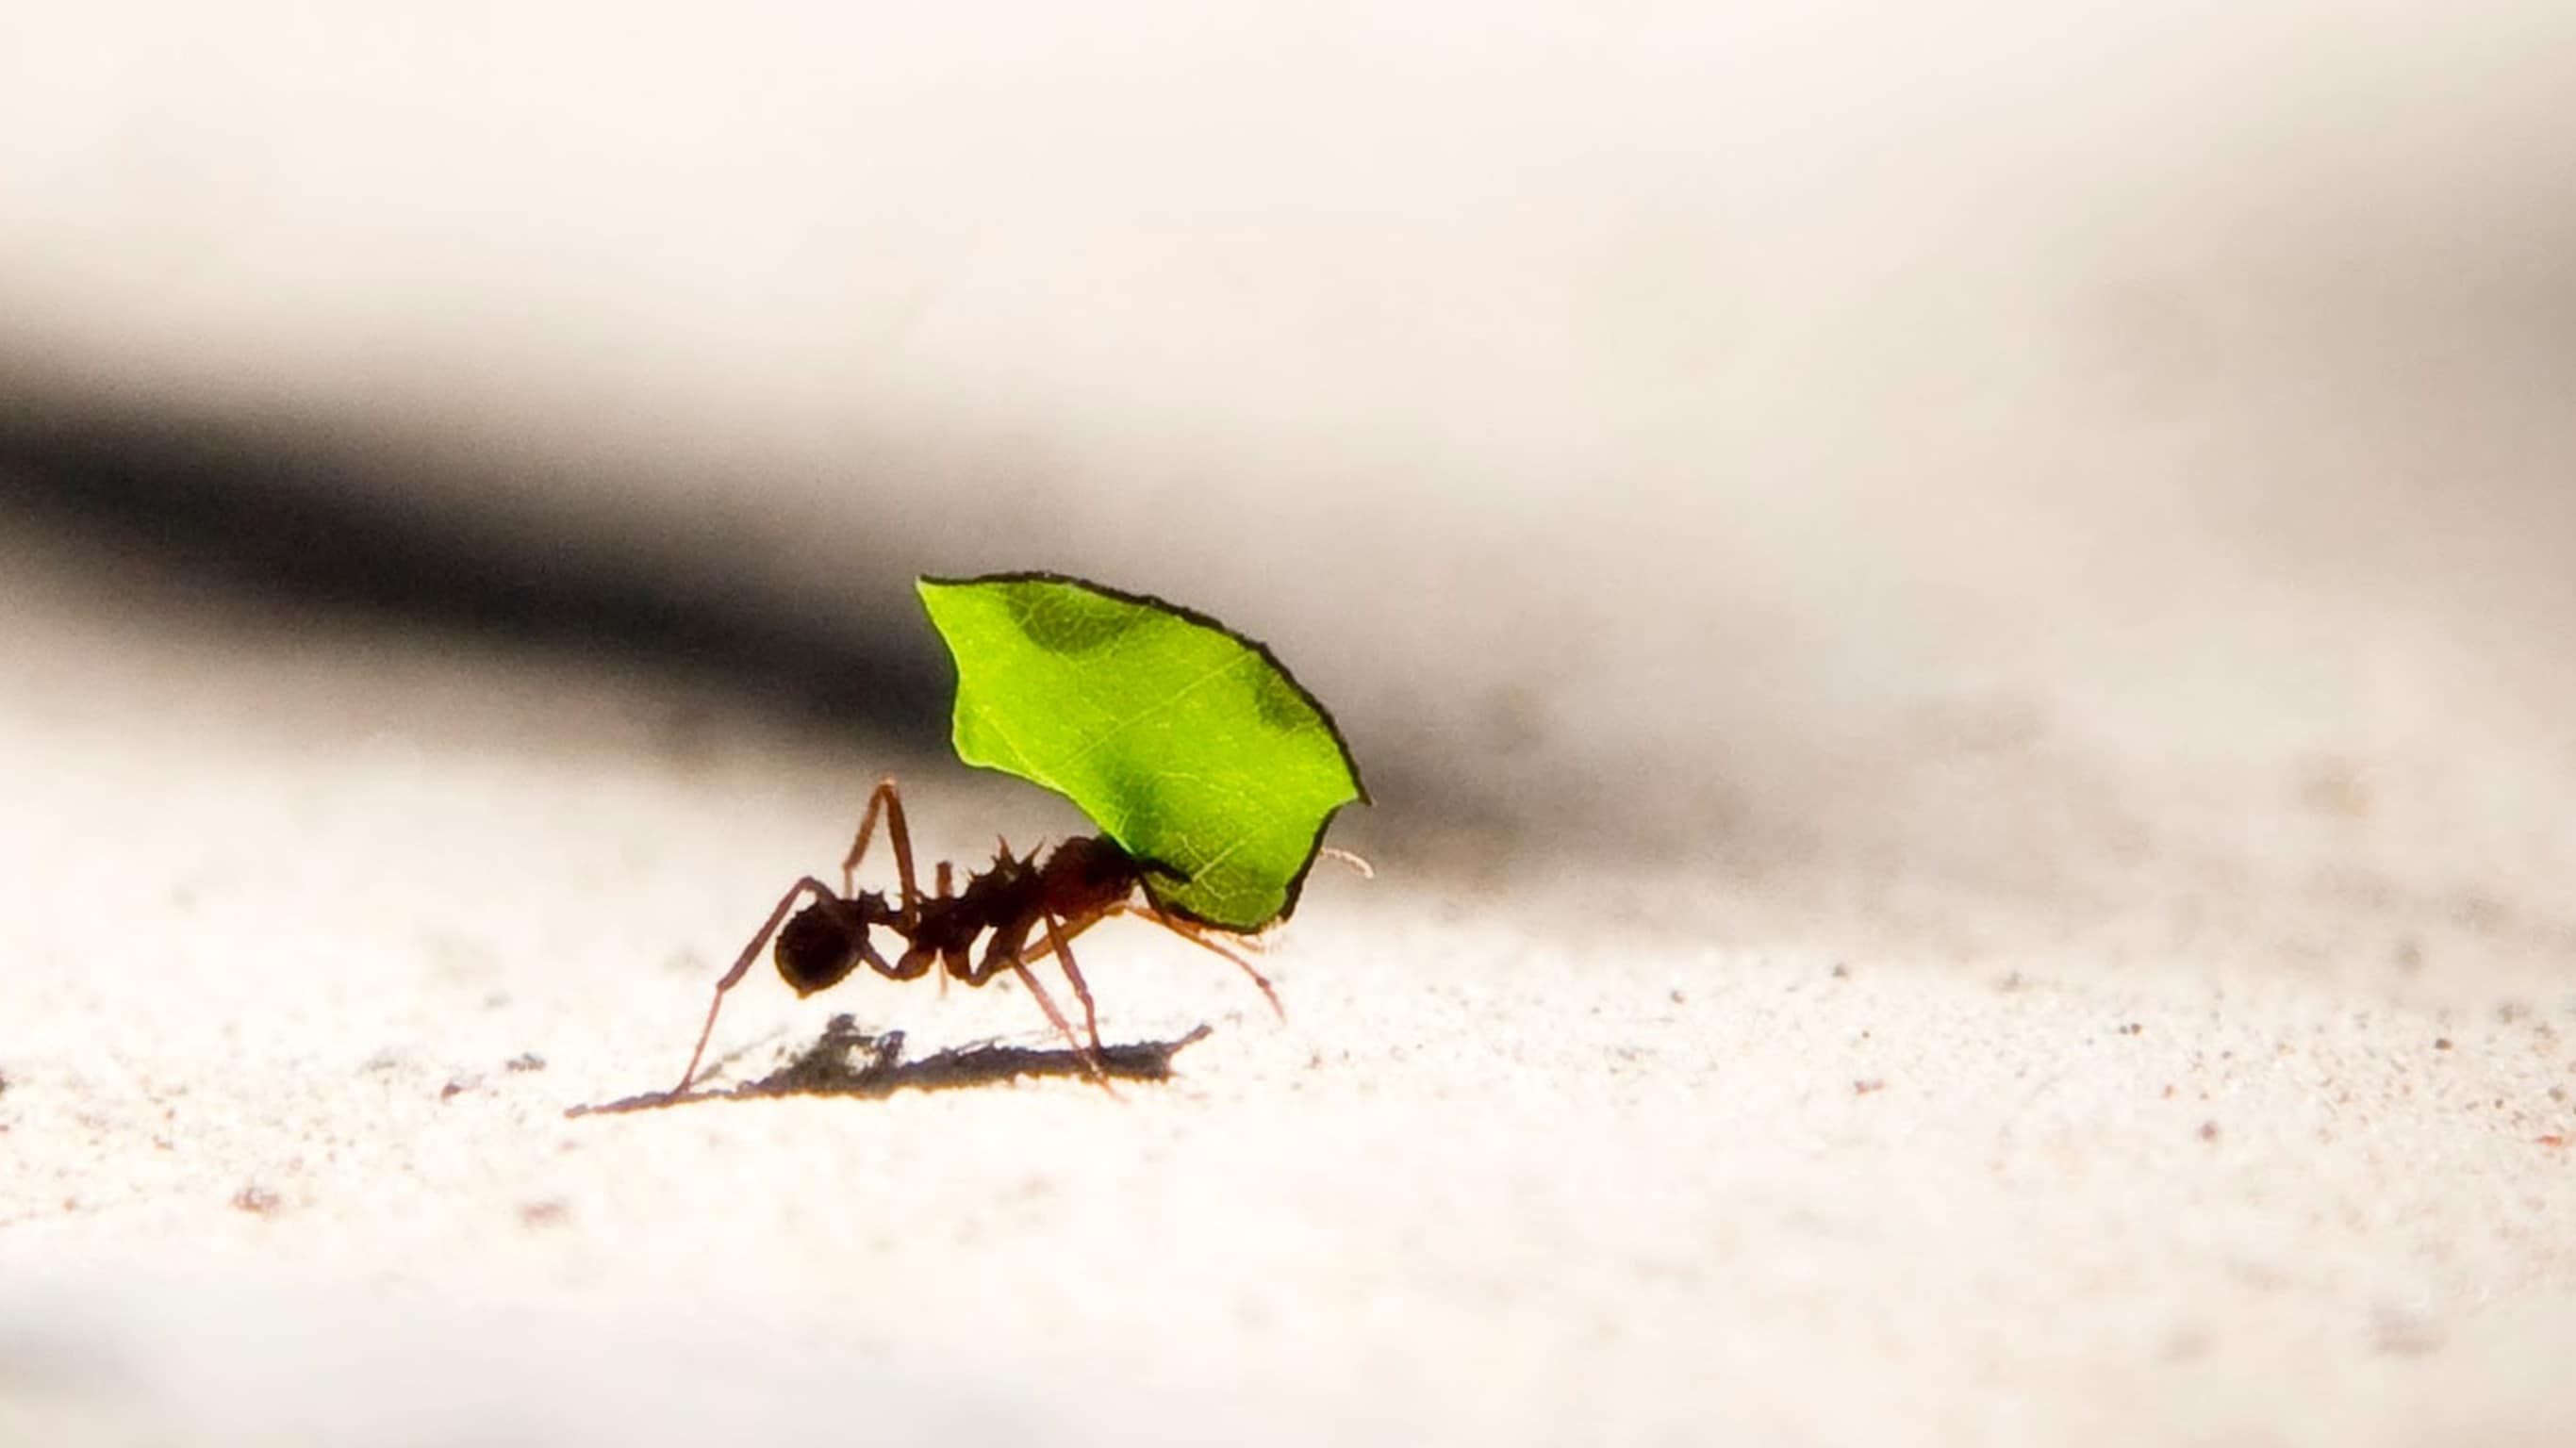 An ant carries a large leaf.